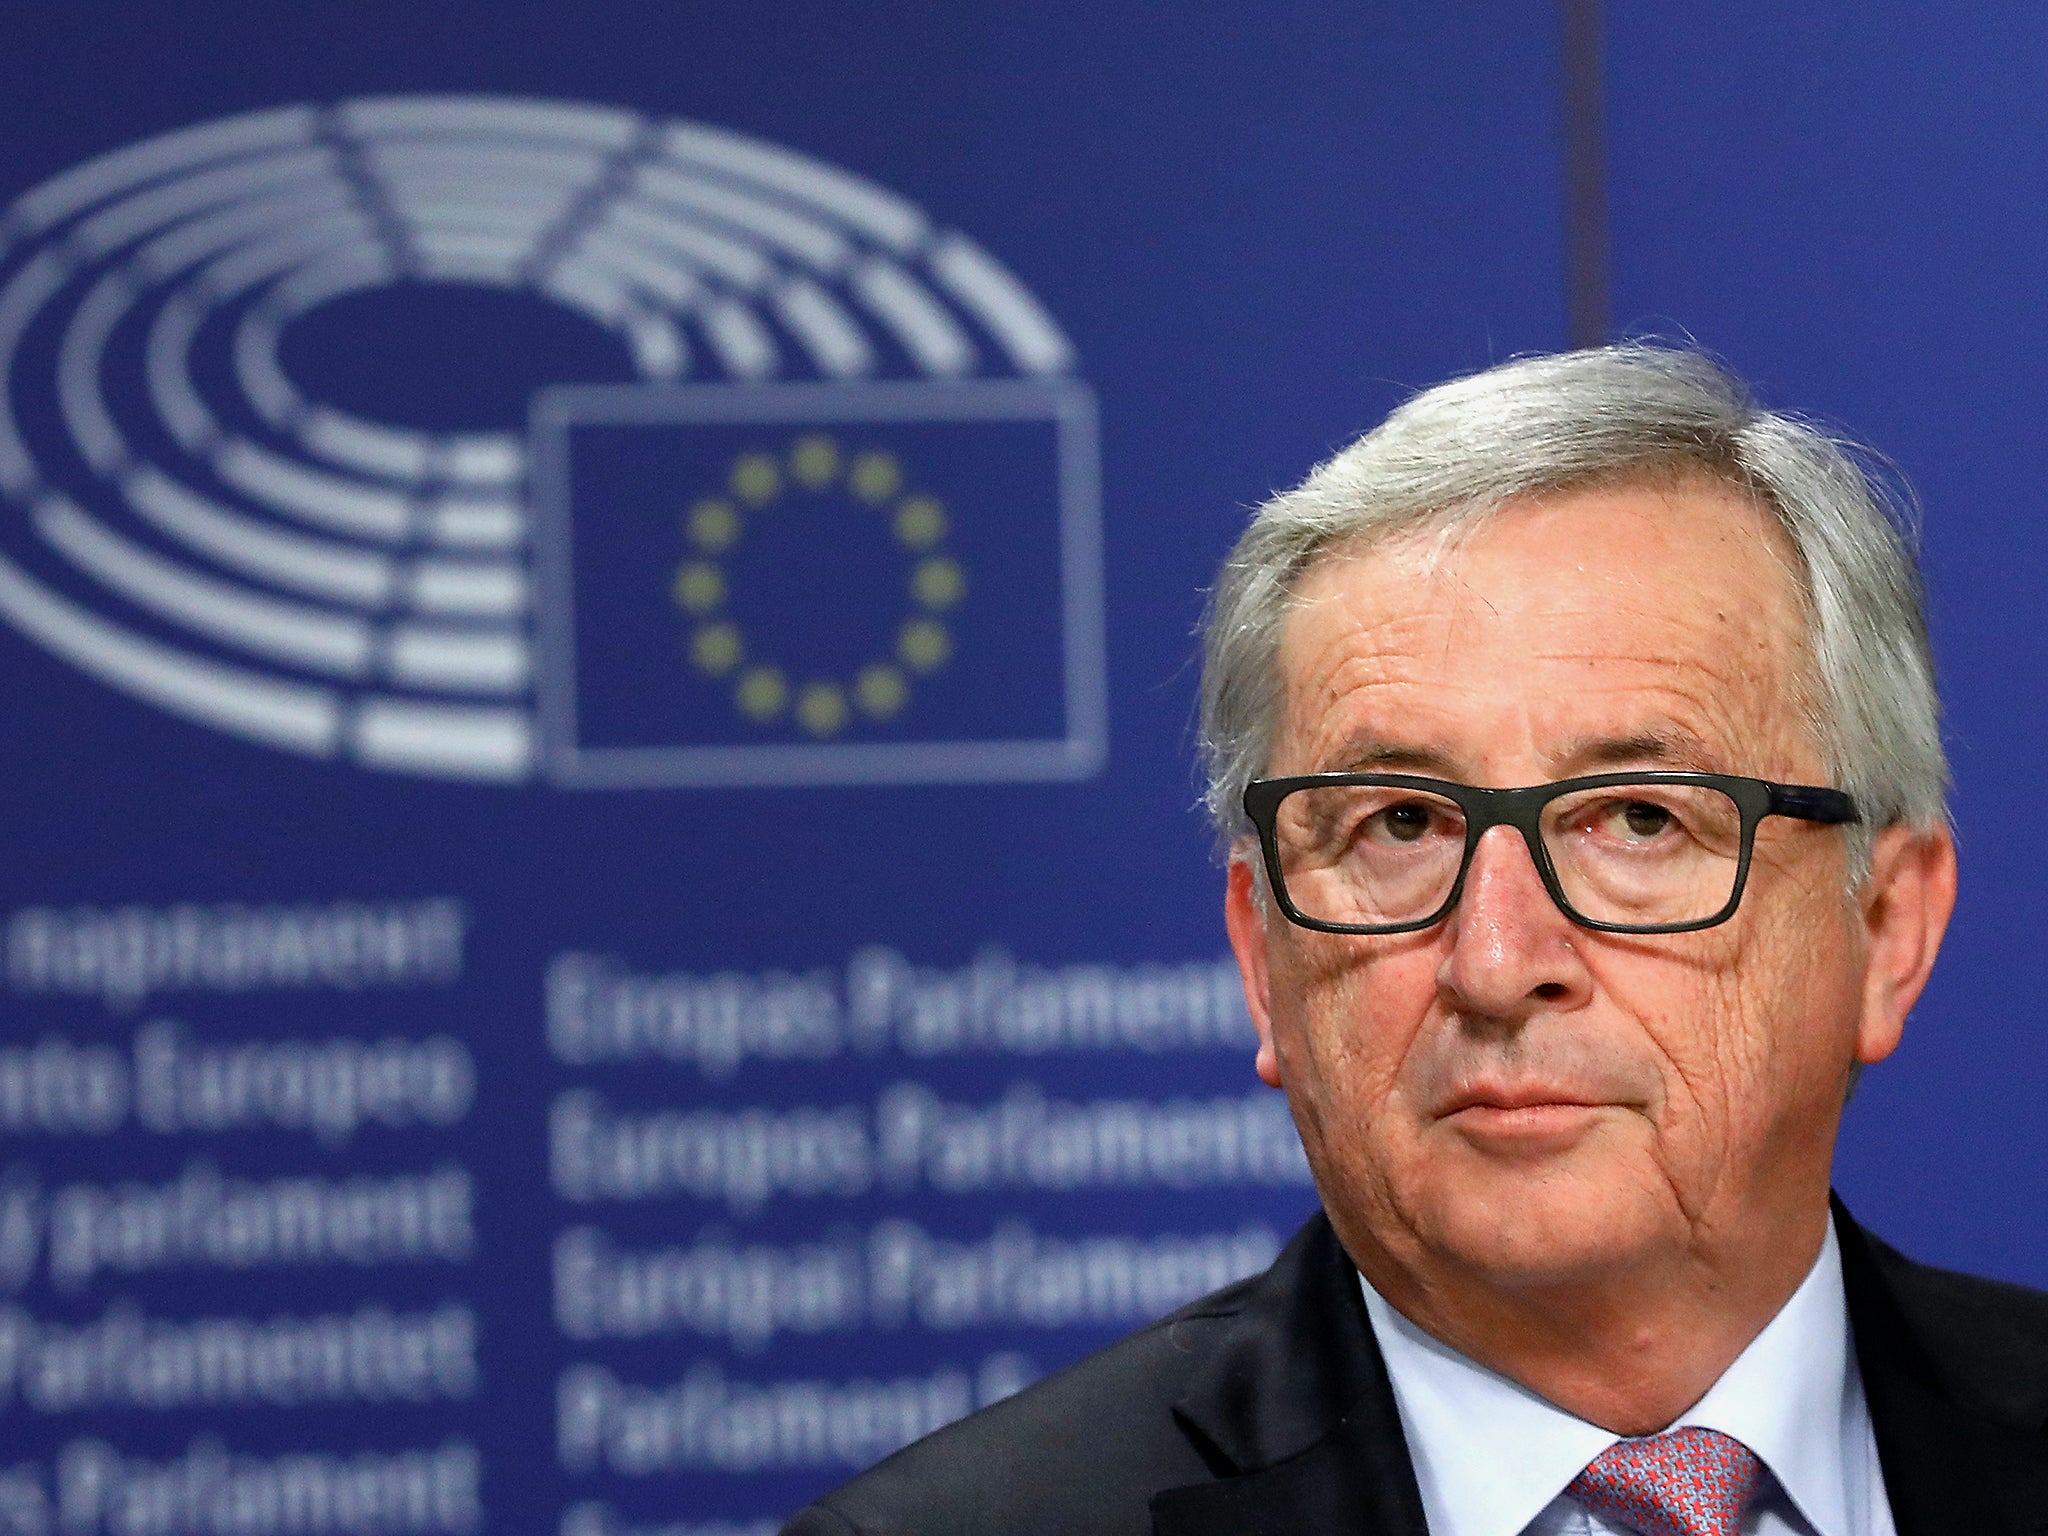 European Commission President Jean-Claude Juncker attends a news conference after the presentation a White Paper on the Future of Europe in Brussels, Belgium